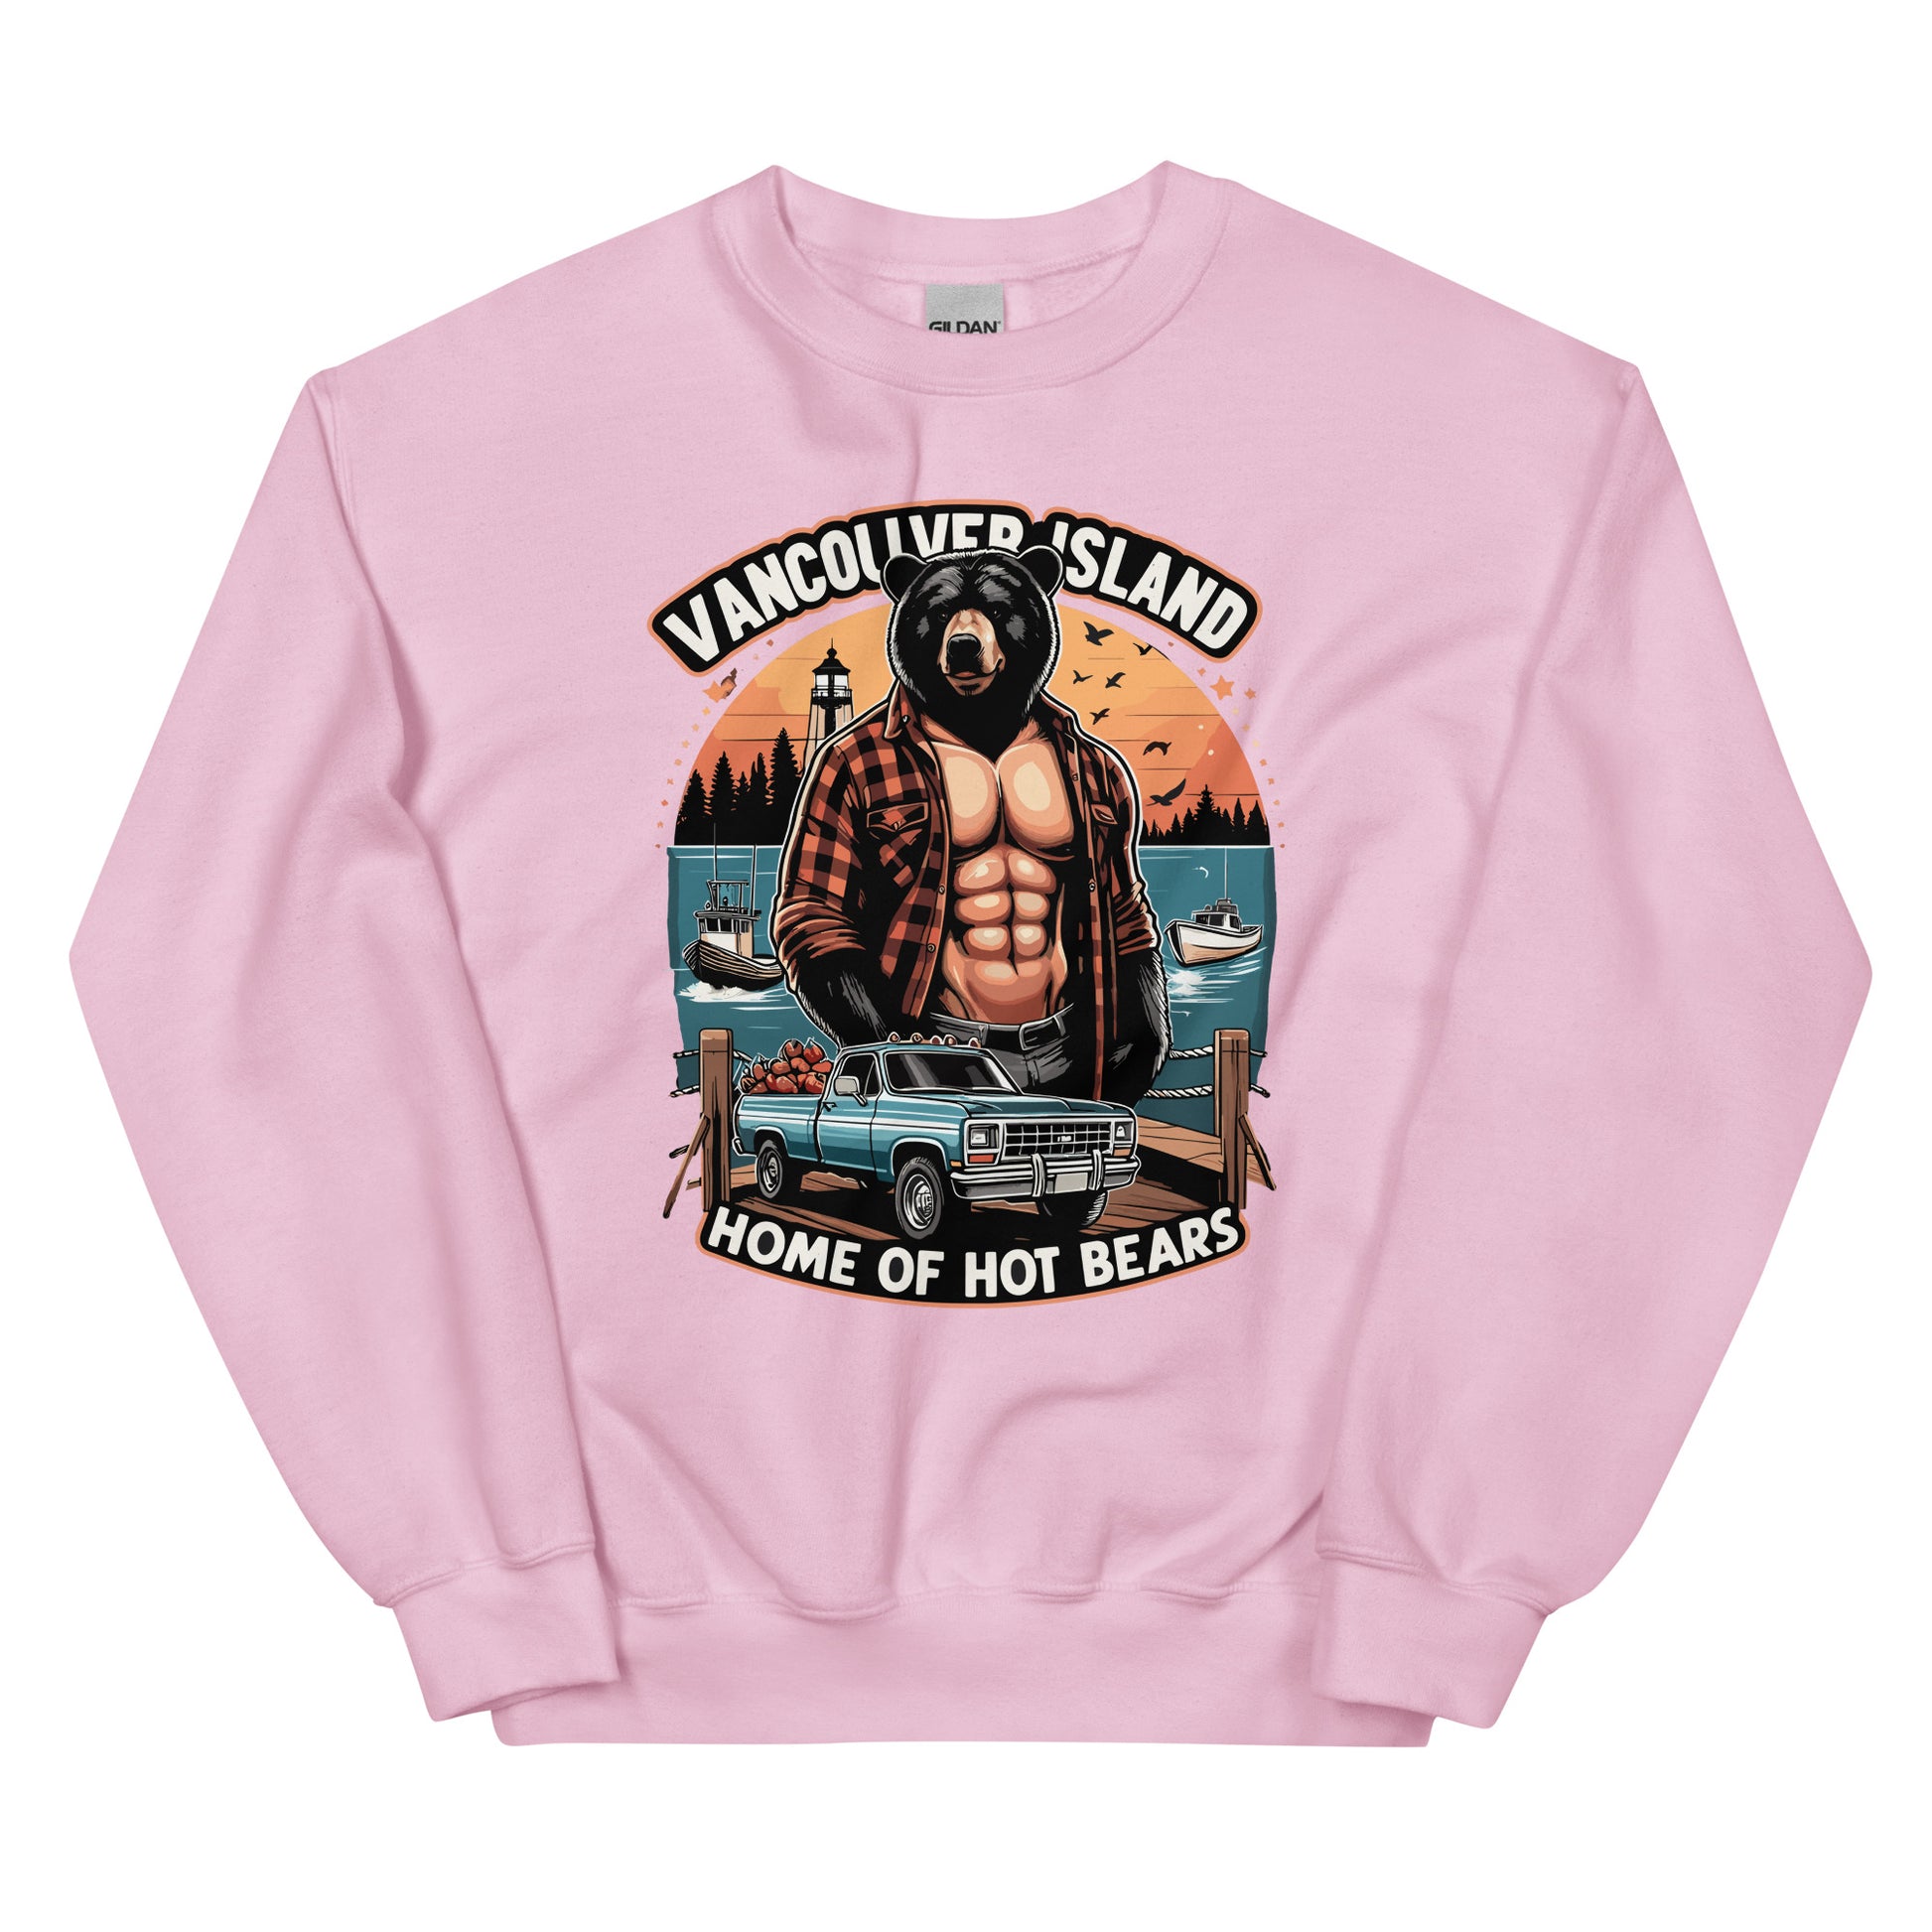 Vancouver Island Home of Bears print with a shirtless man with a bear head with a truck by the dock on the ocean printed on a crewneck sweatshirt by Whistler Shirts